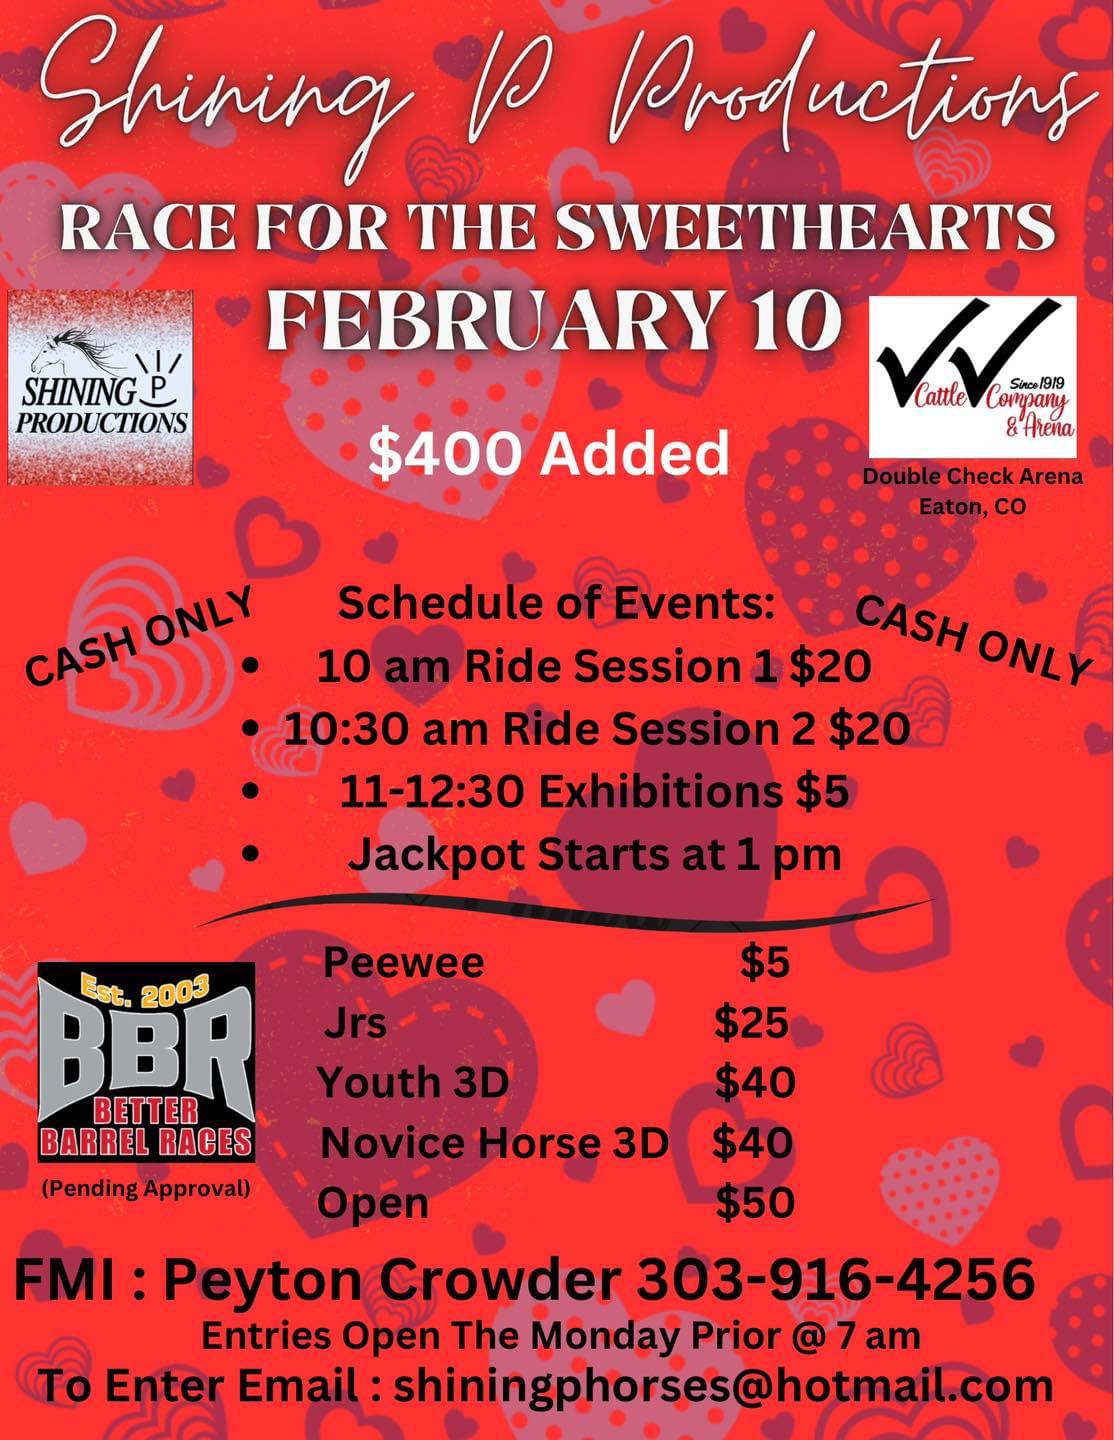 Race for the Sweethearts